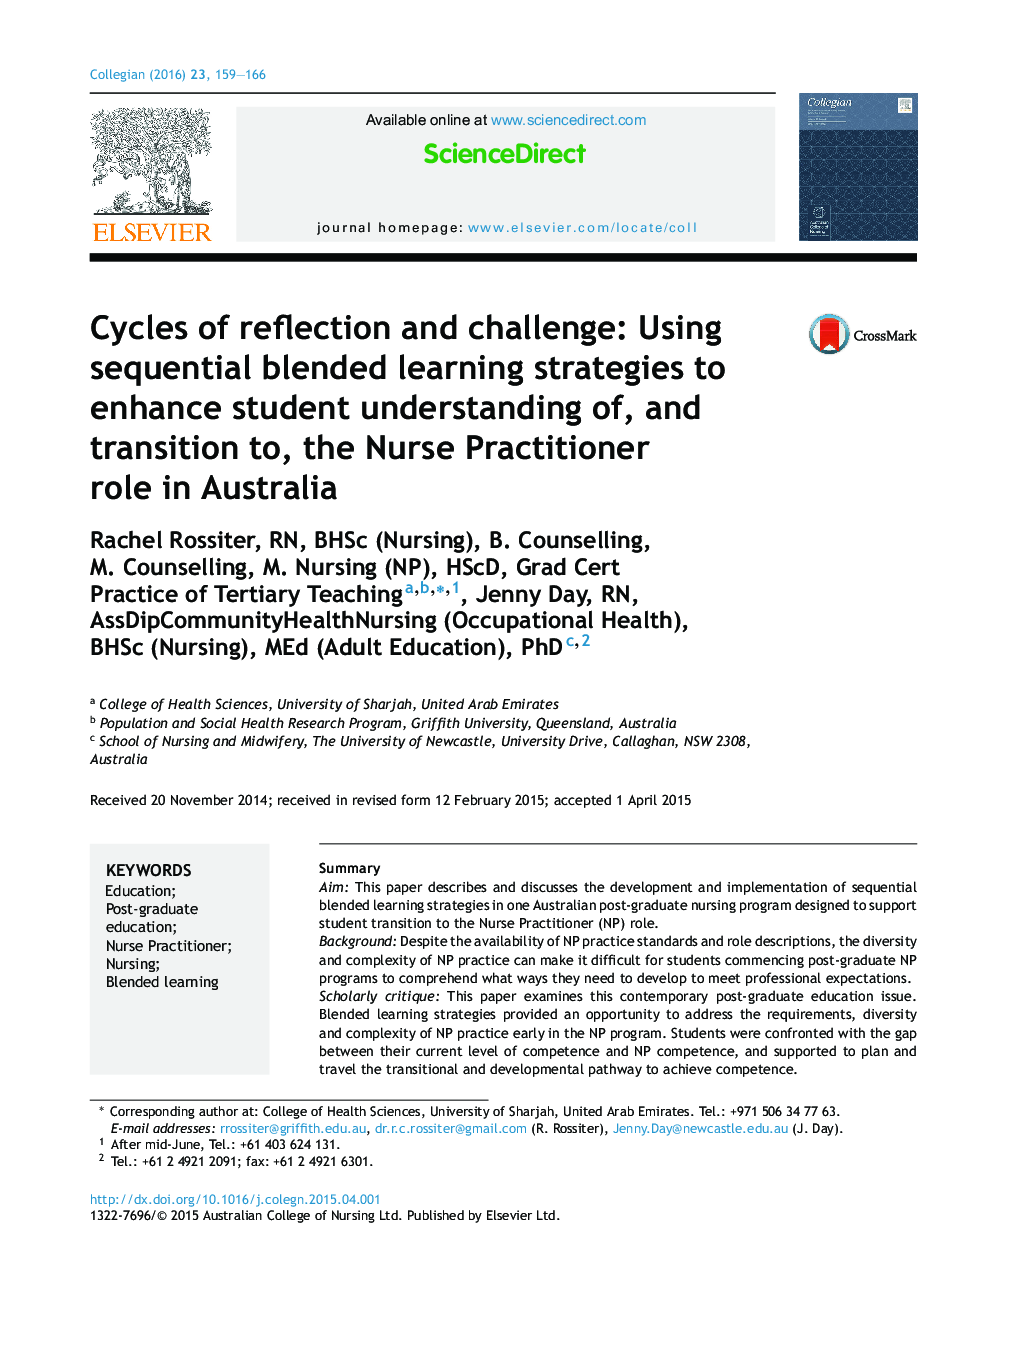 Cycles of reflection and challenge: Using sequential blended learning strategies to enhance student understanding of, and transition to, the Nurse Practitioner role in Australia